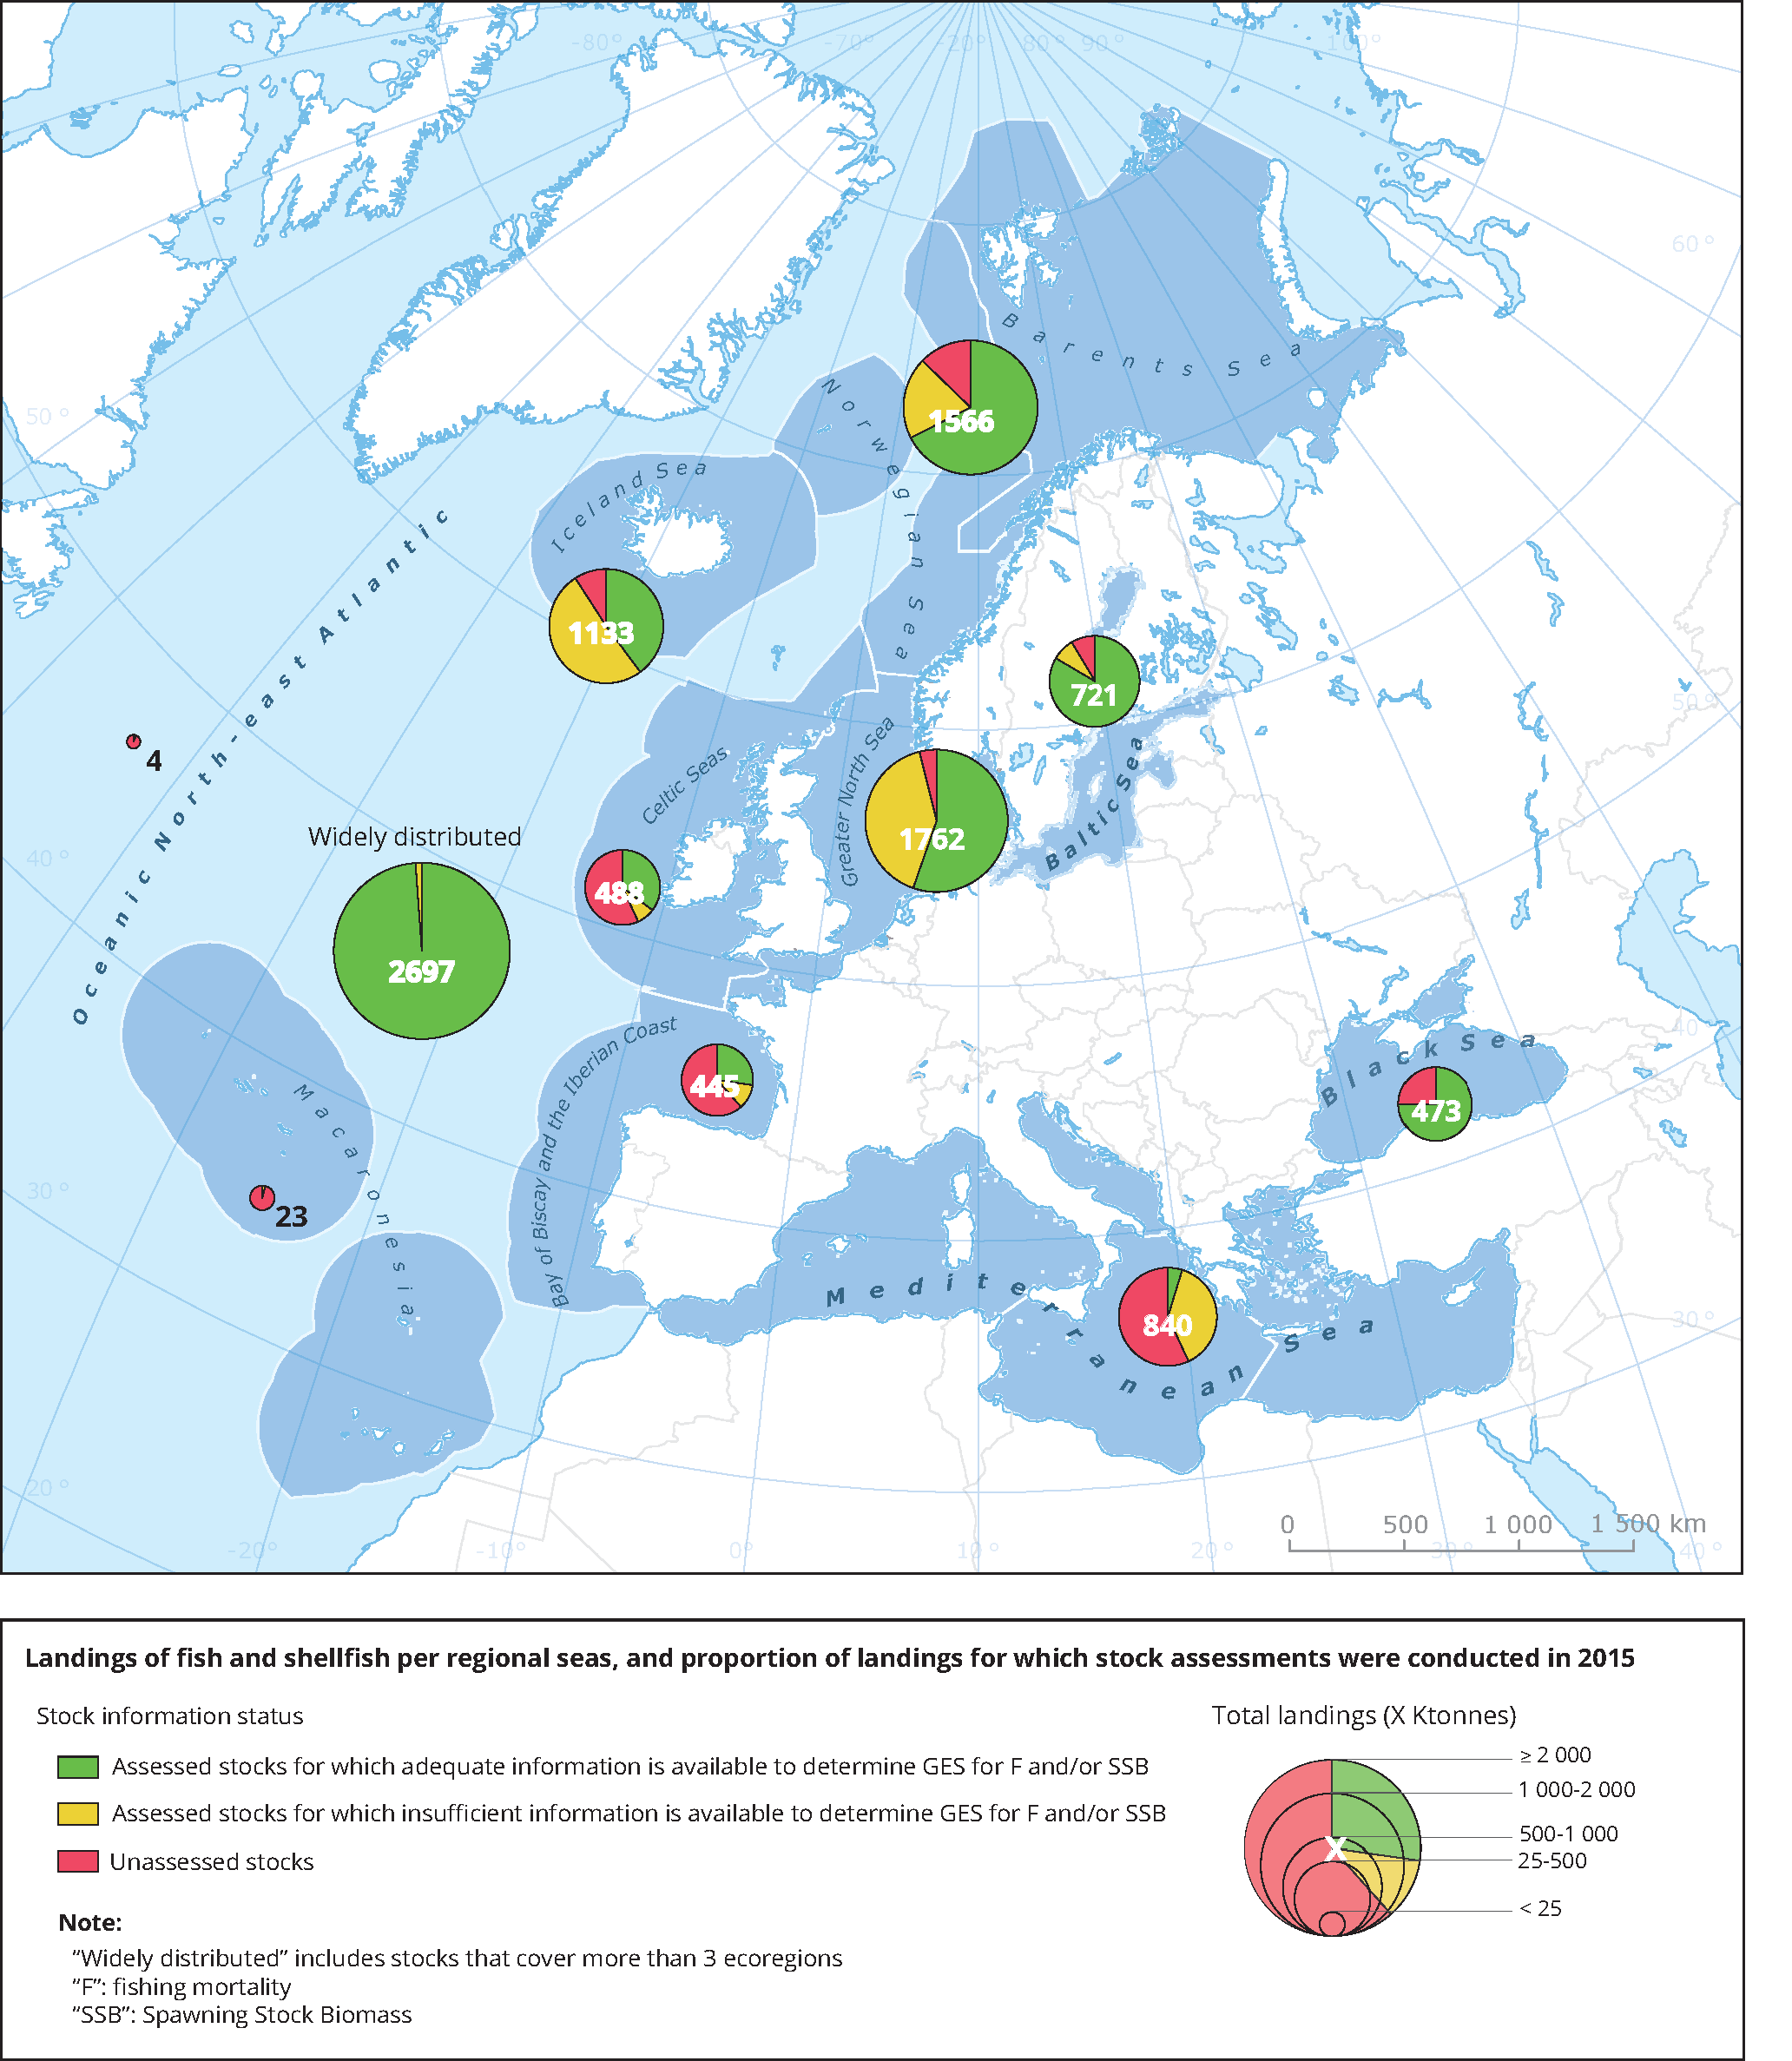 Landings of fish and shellfish per regional sea, and proportion of landings for which stock assessments are available